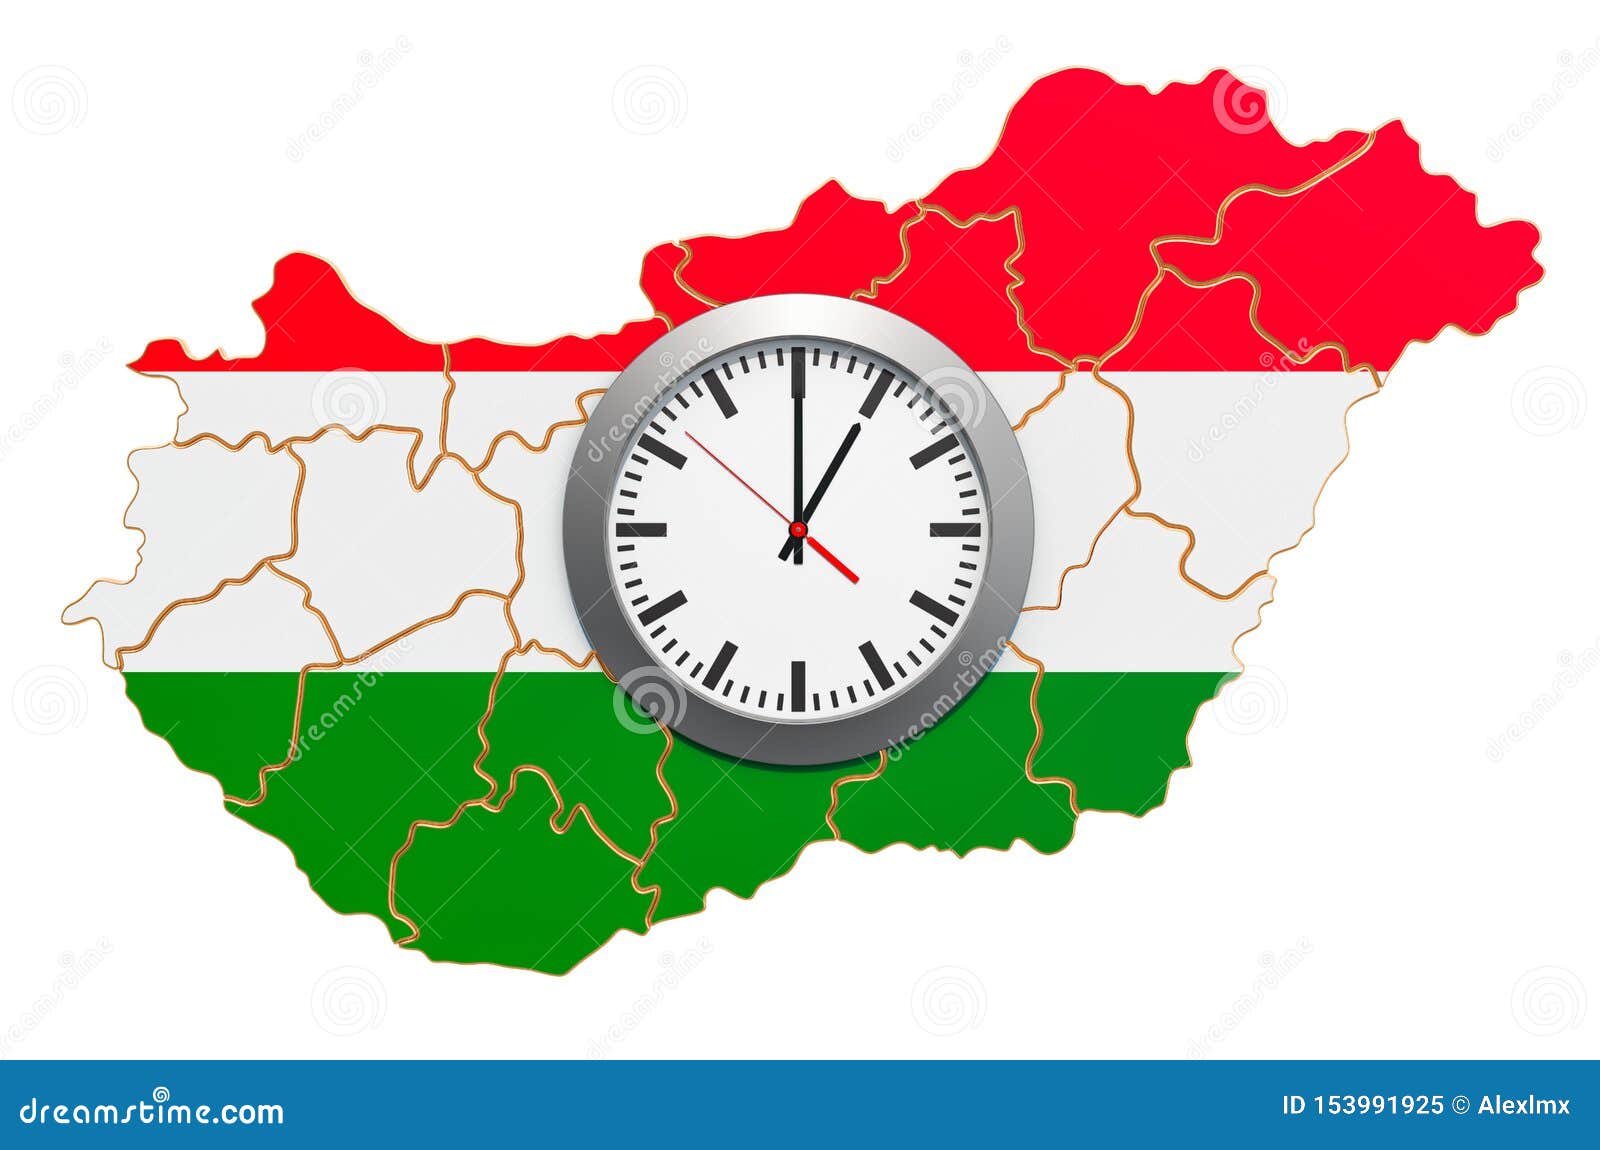 time-zones-in-hungary-concept-3d-rendering-stock-illustration